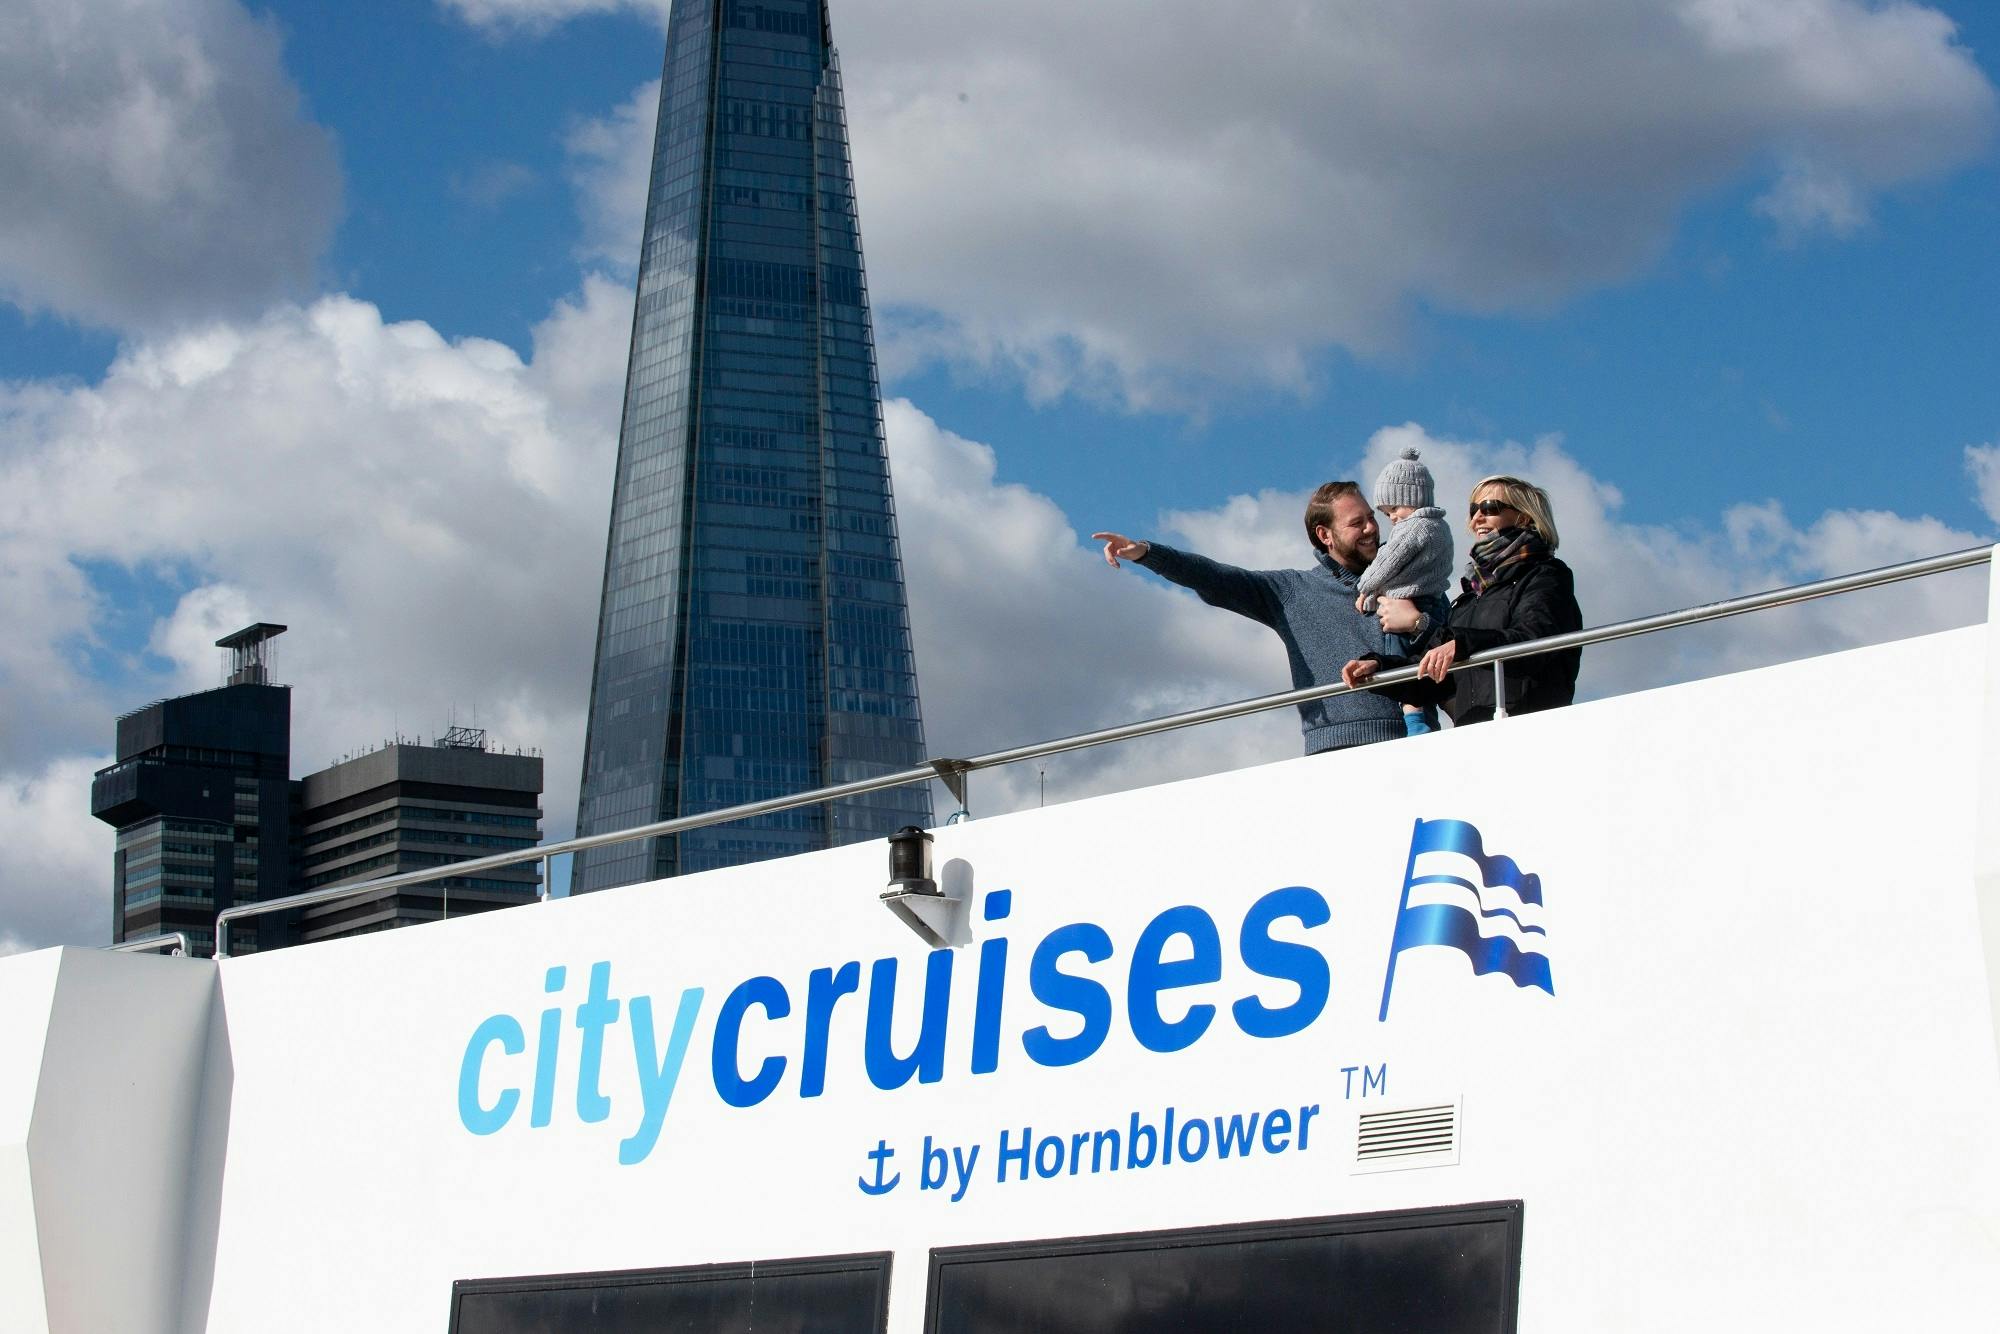 One-Way Sightseeing Cruise on the Thames River